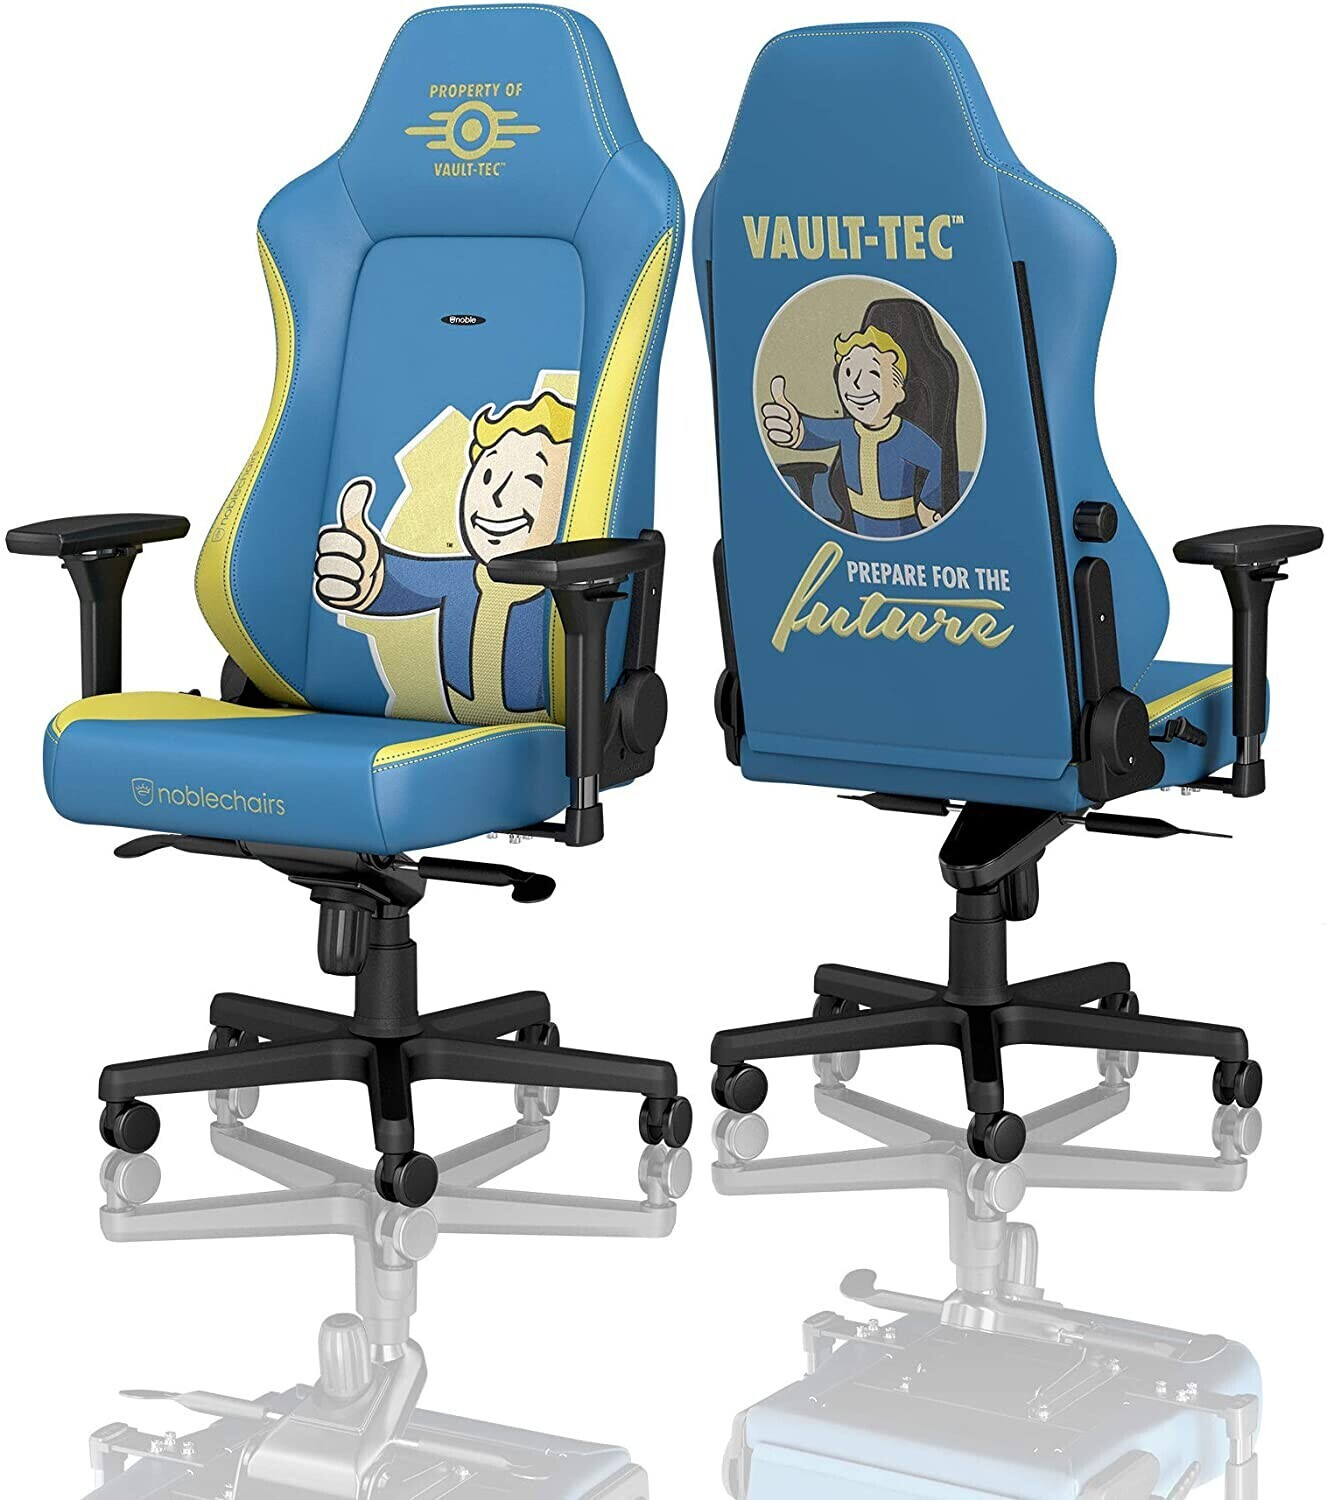 Noblechairs Hero Fallout Vault Tec Edition ab 449,90